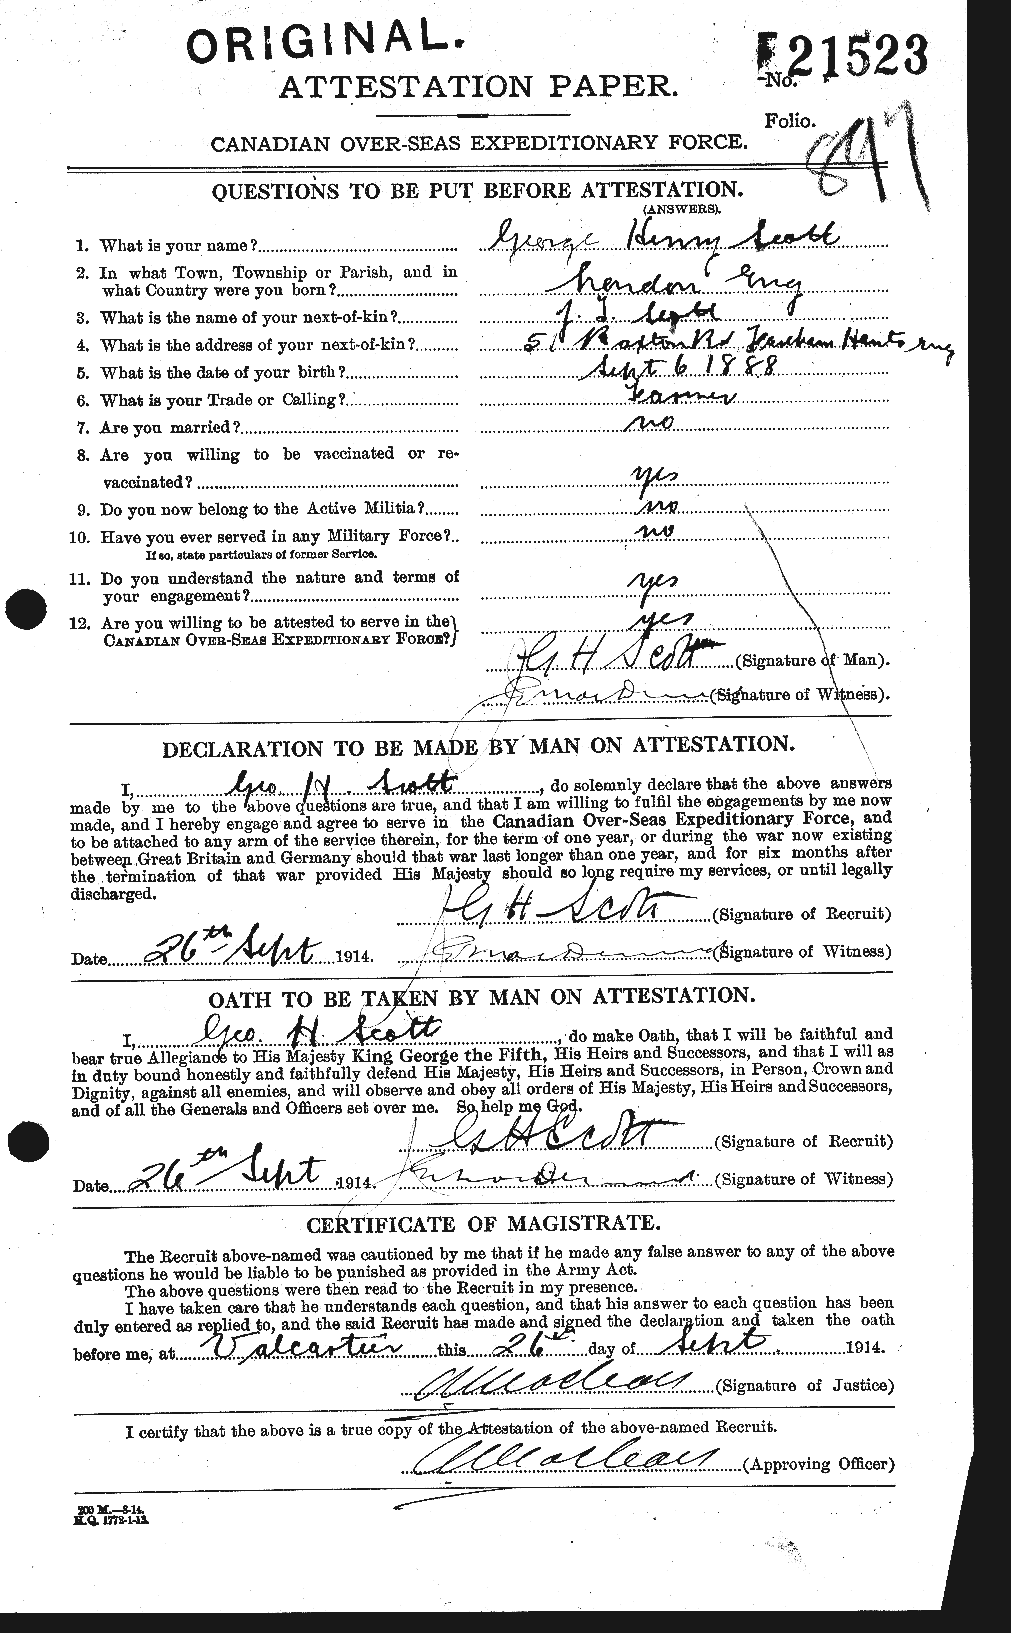 Personnel Records of the First World War - CEF 083545a